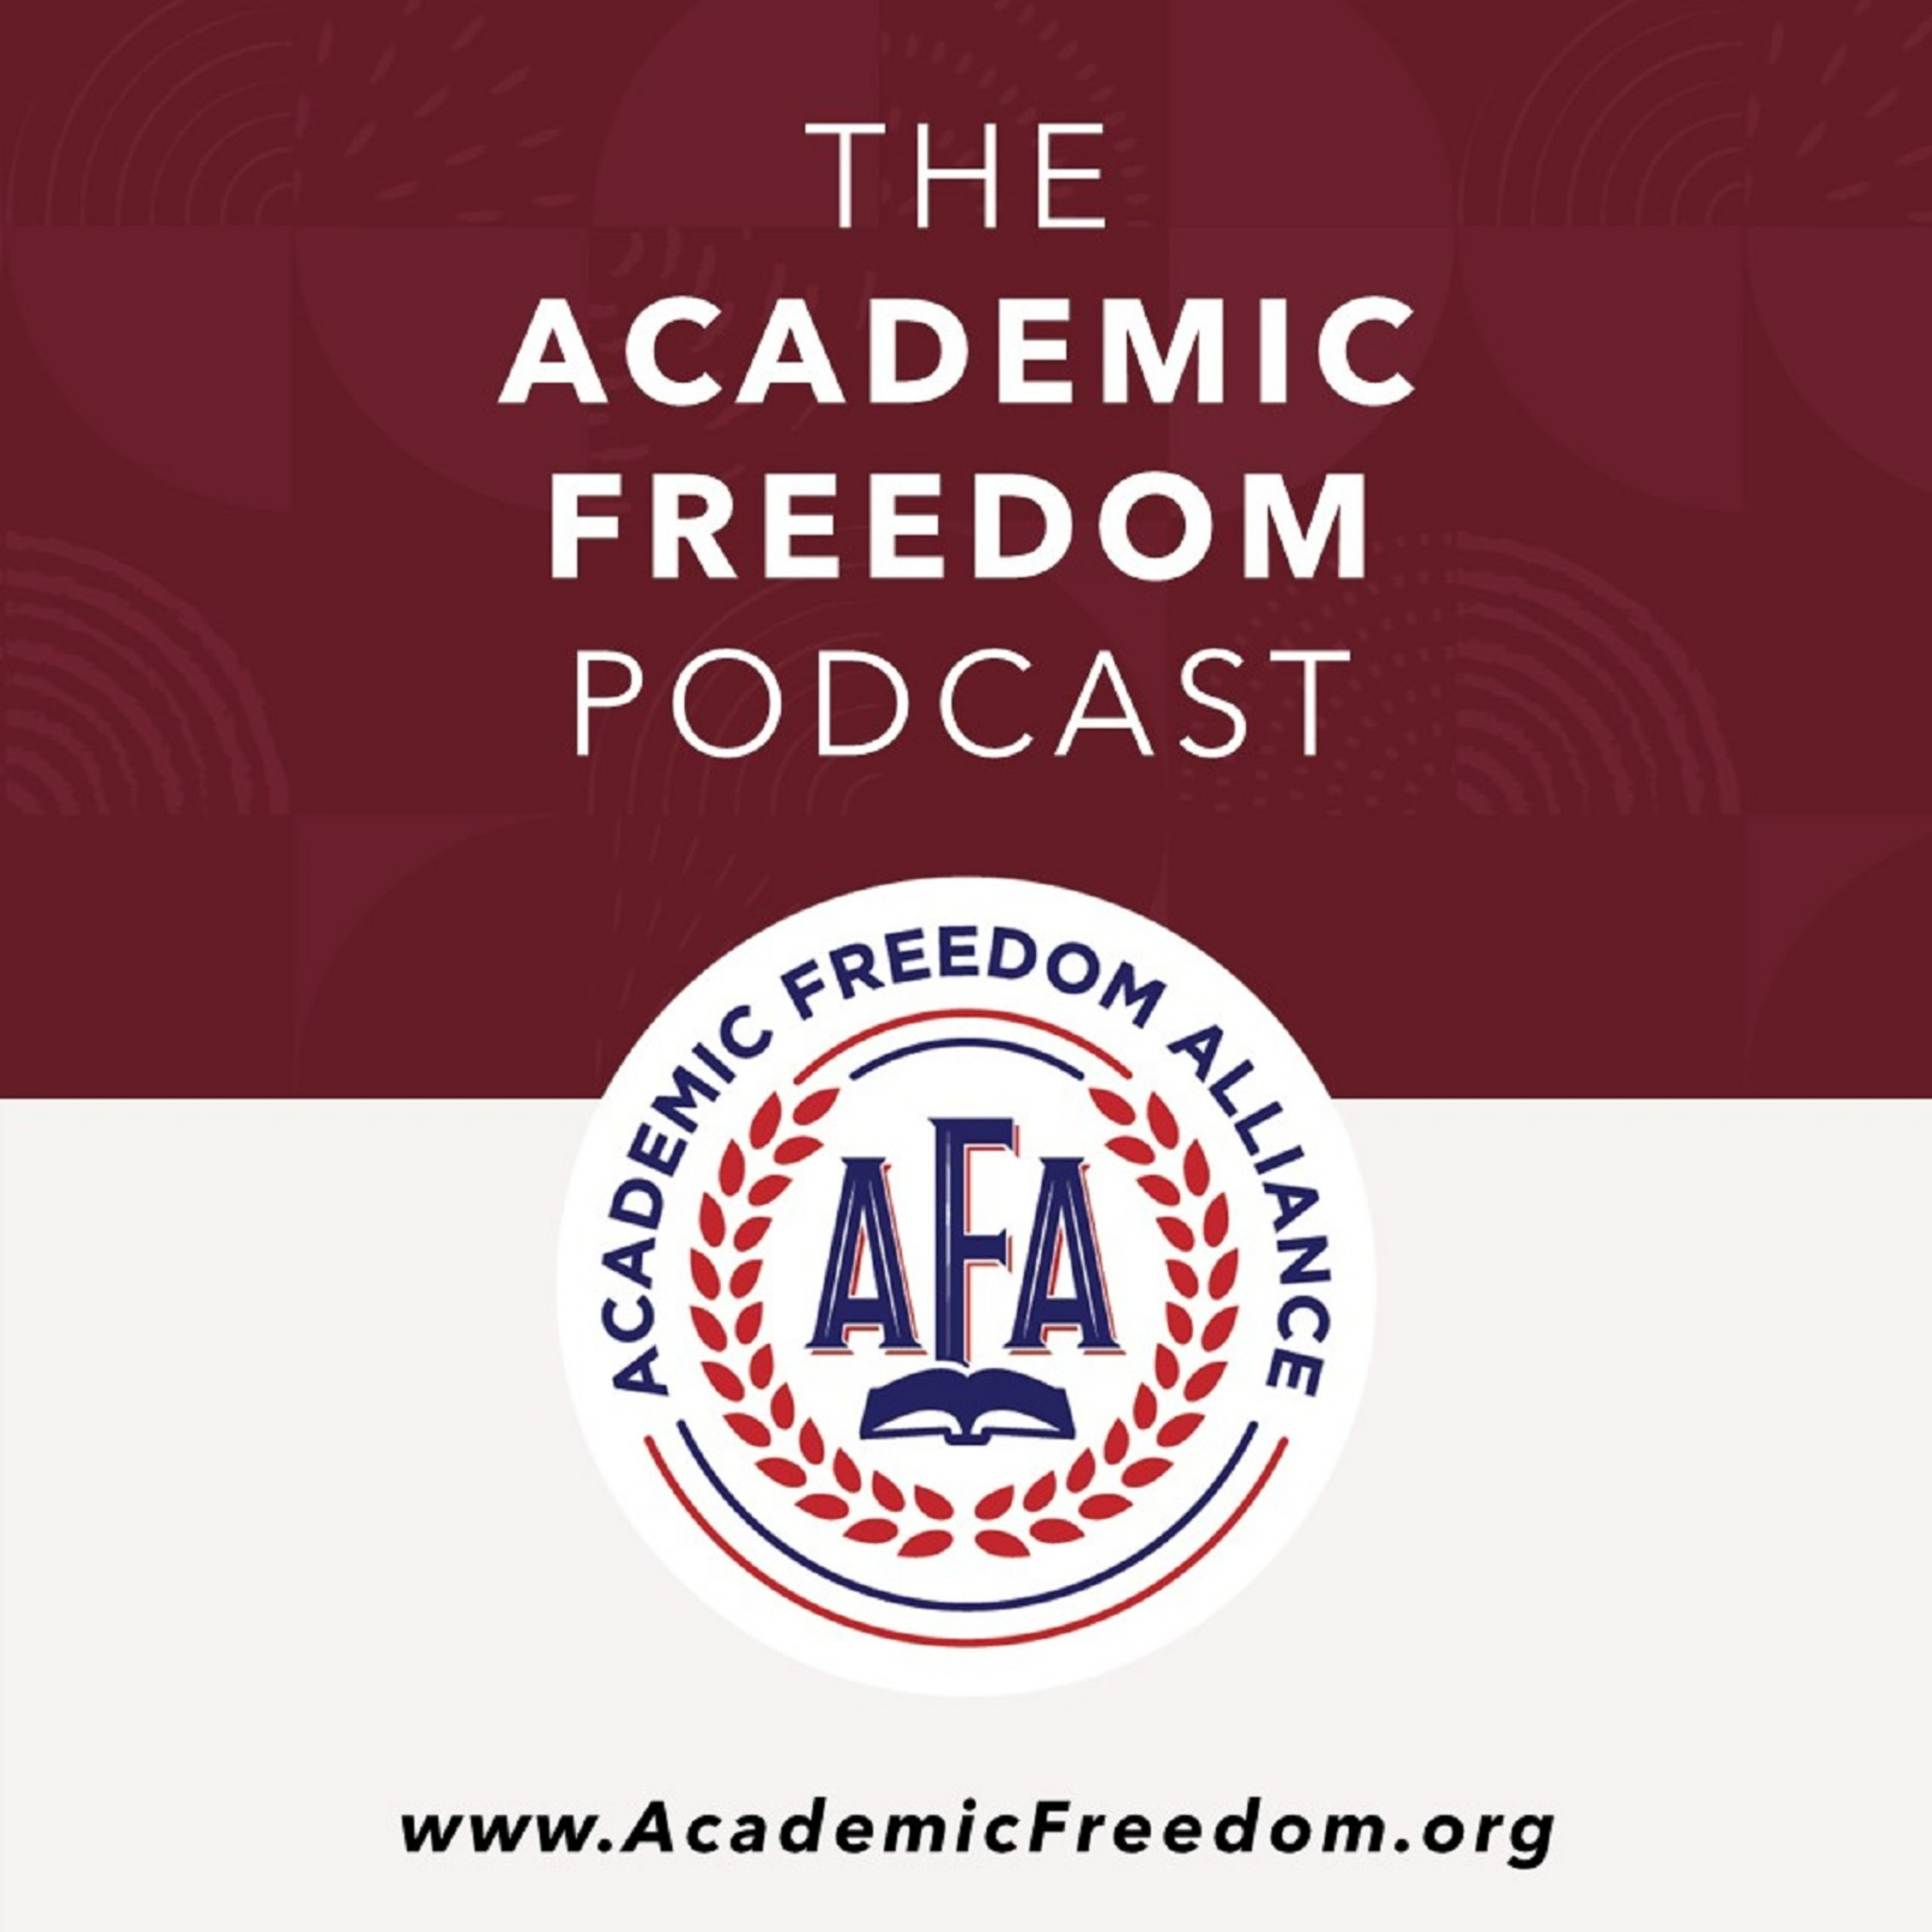 The Academic Freedom Podcast